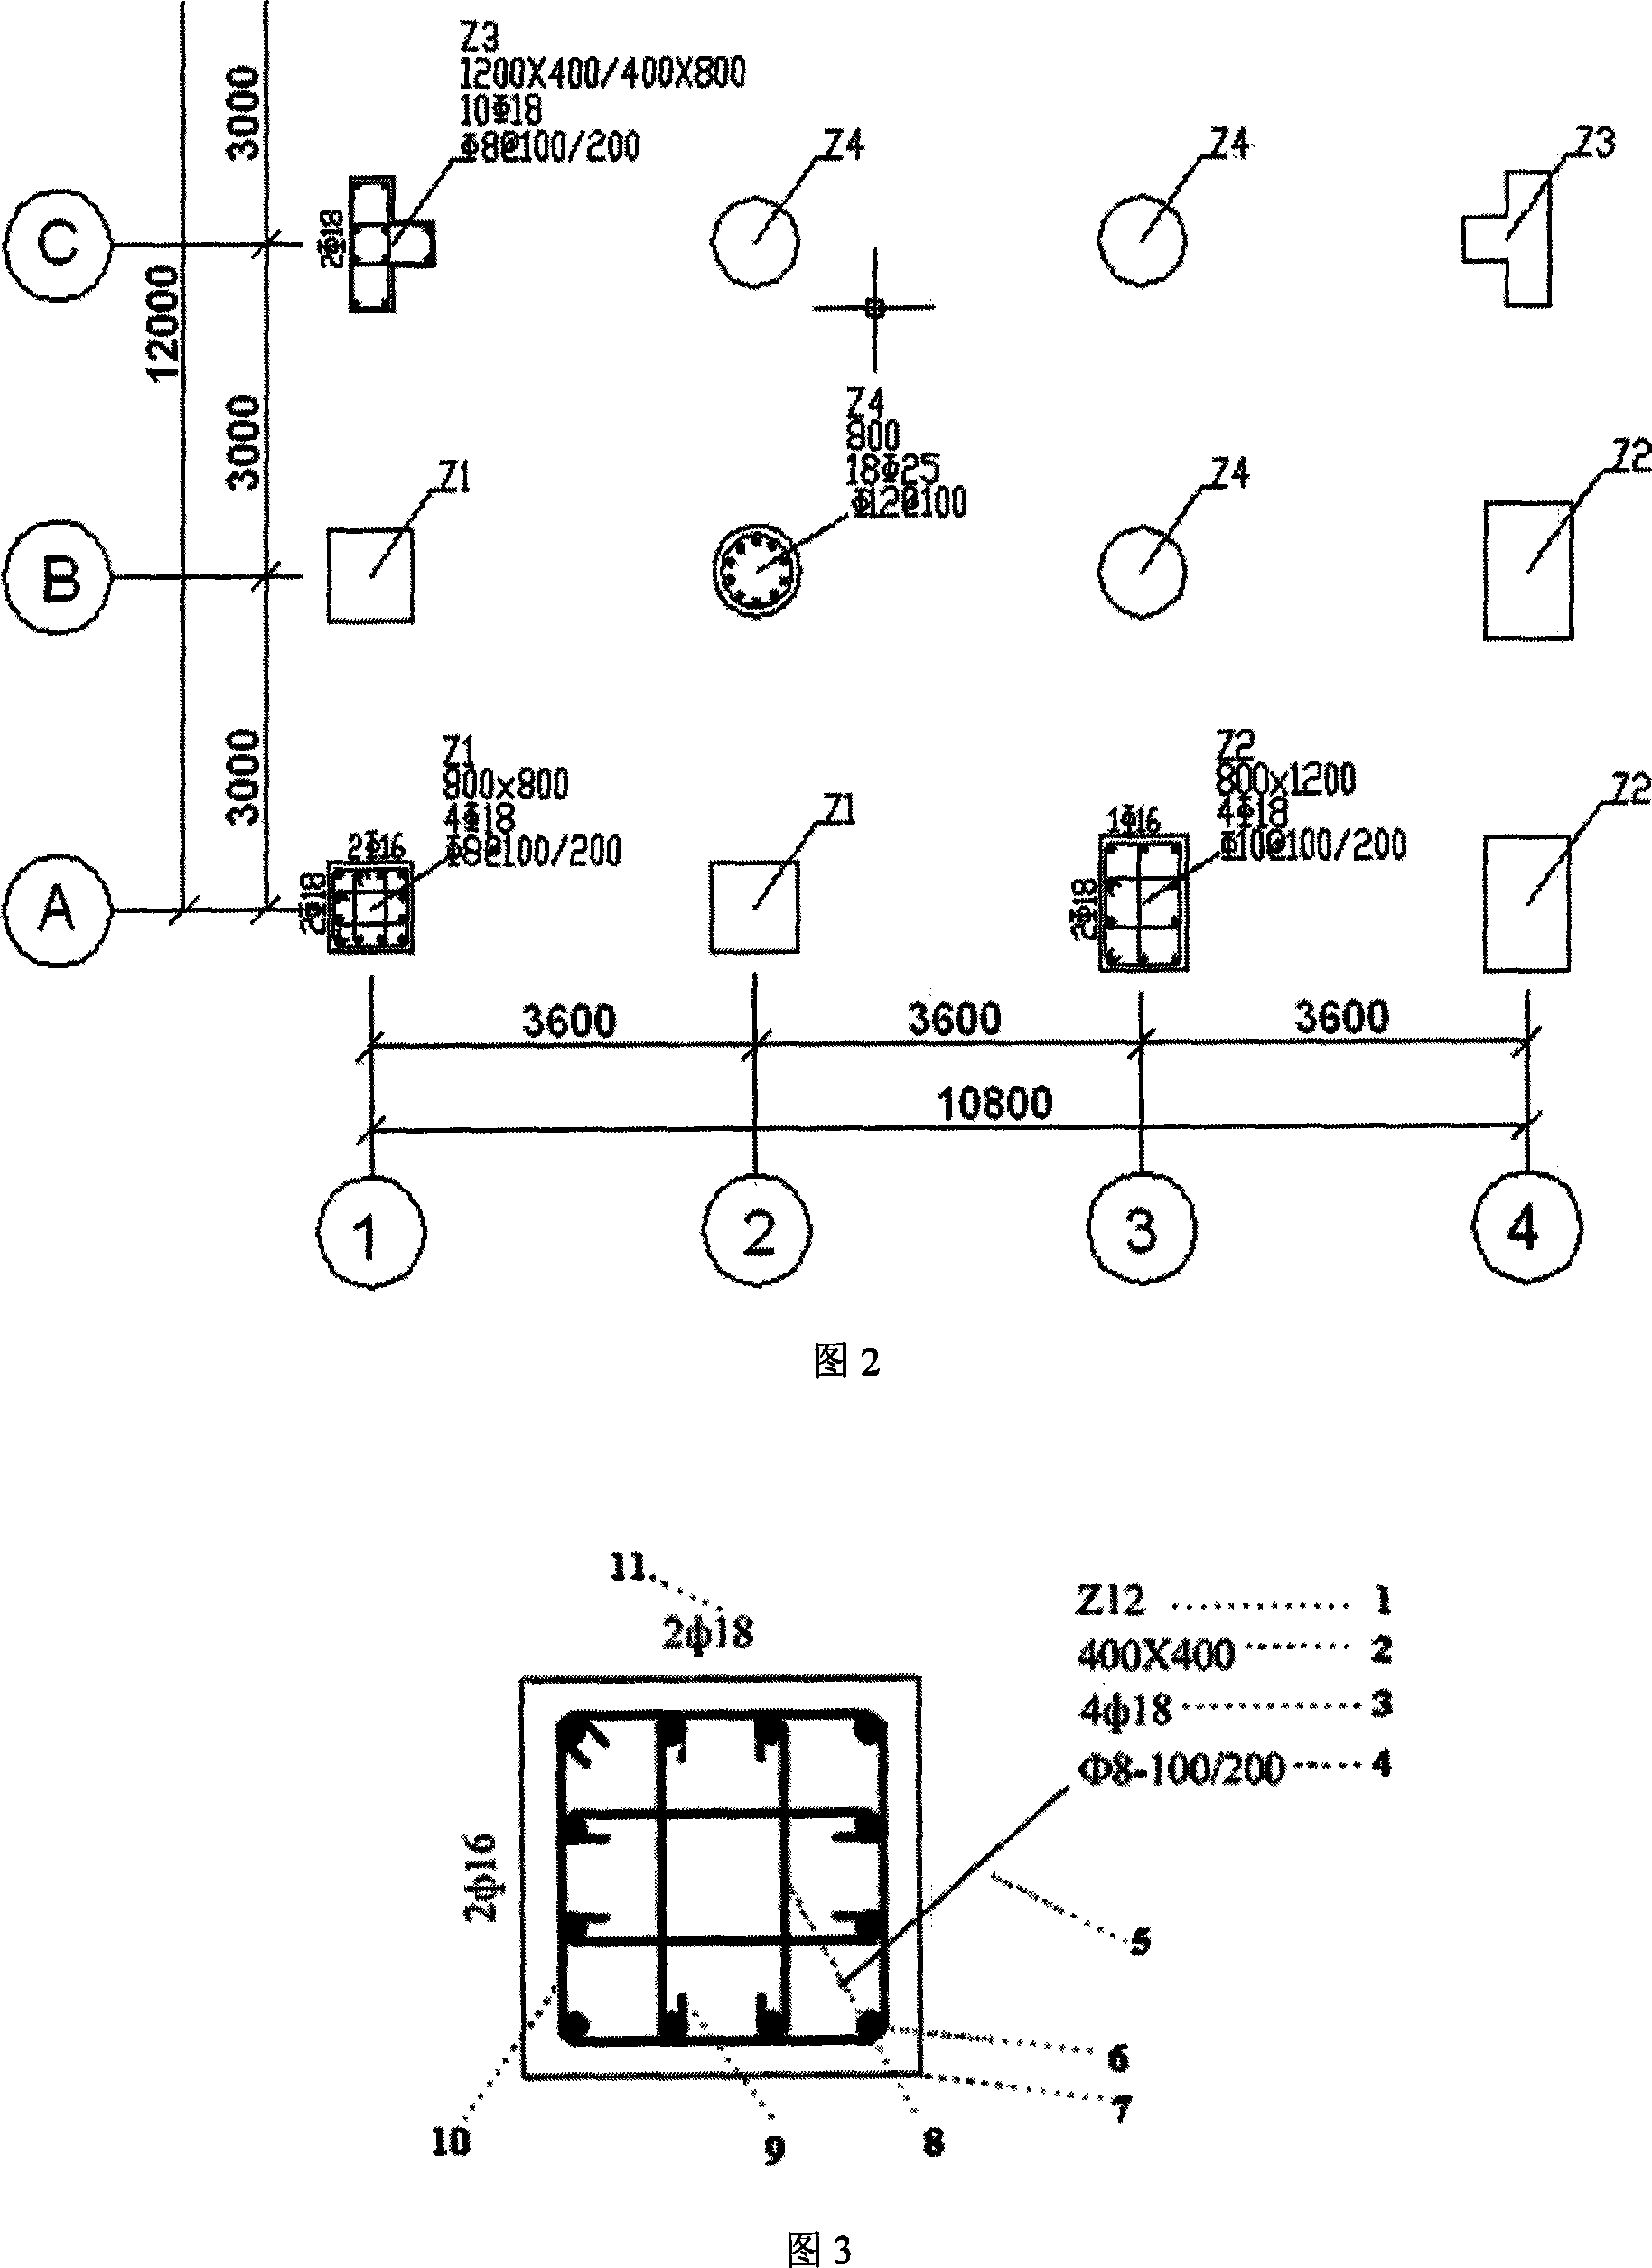 Schedule drawing automatic recognition and comprehend method